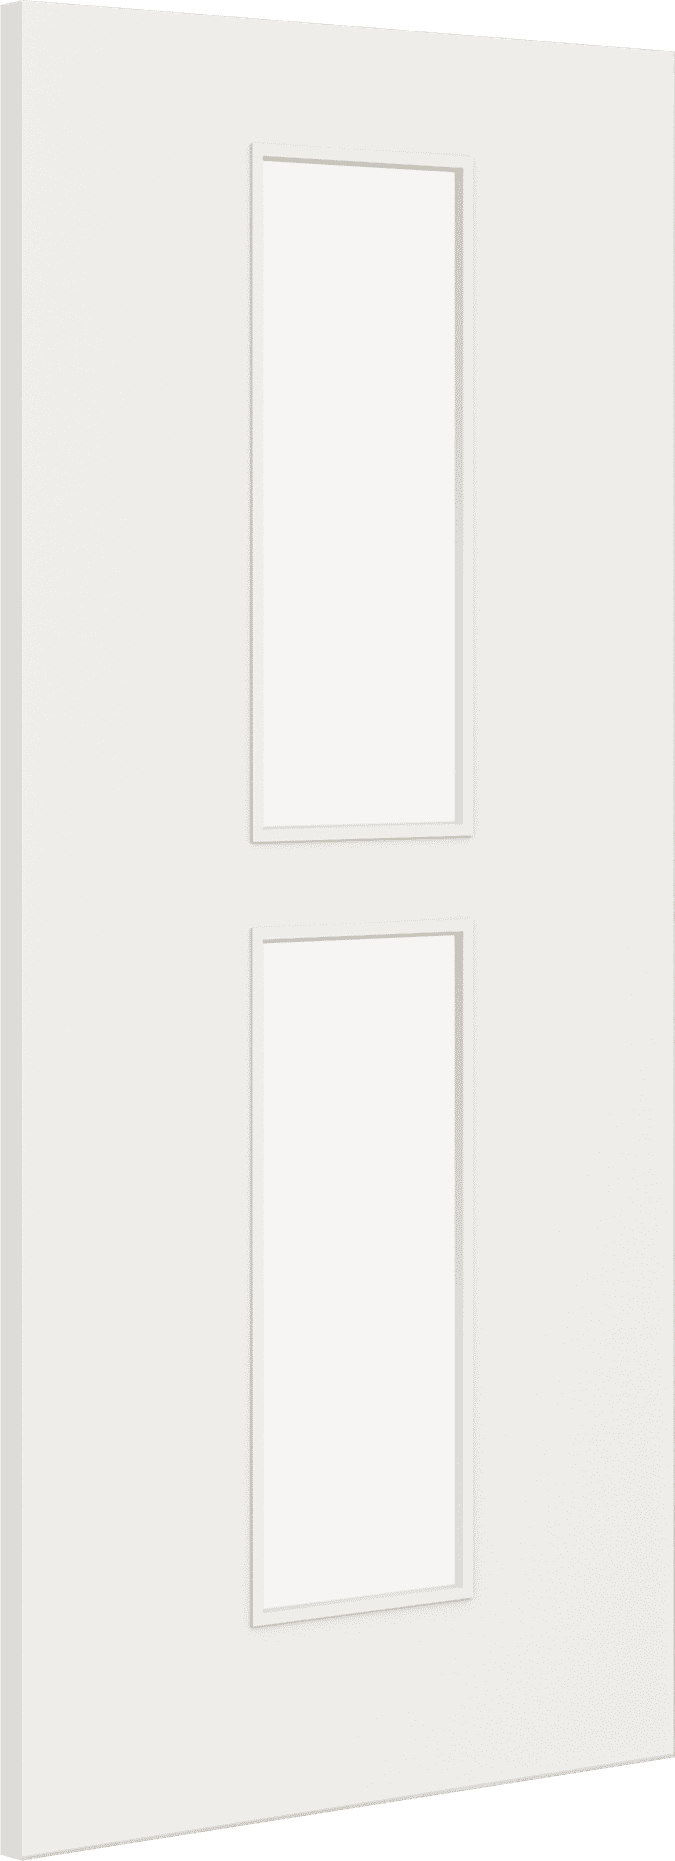 1981mm x 610mm x 44mm (24") Architectural Paint Grade White 12 Clear Glazed Fire Door Blank